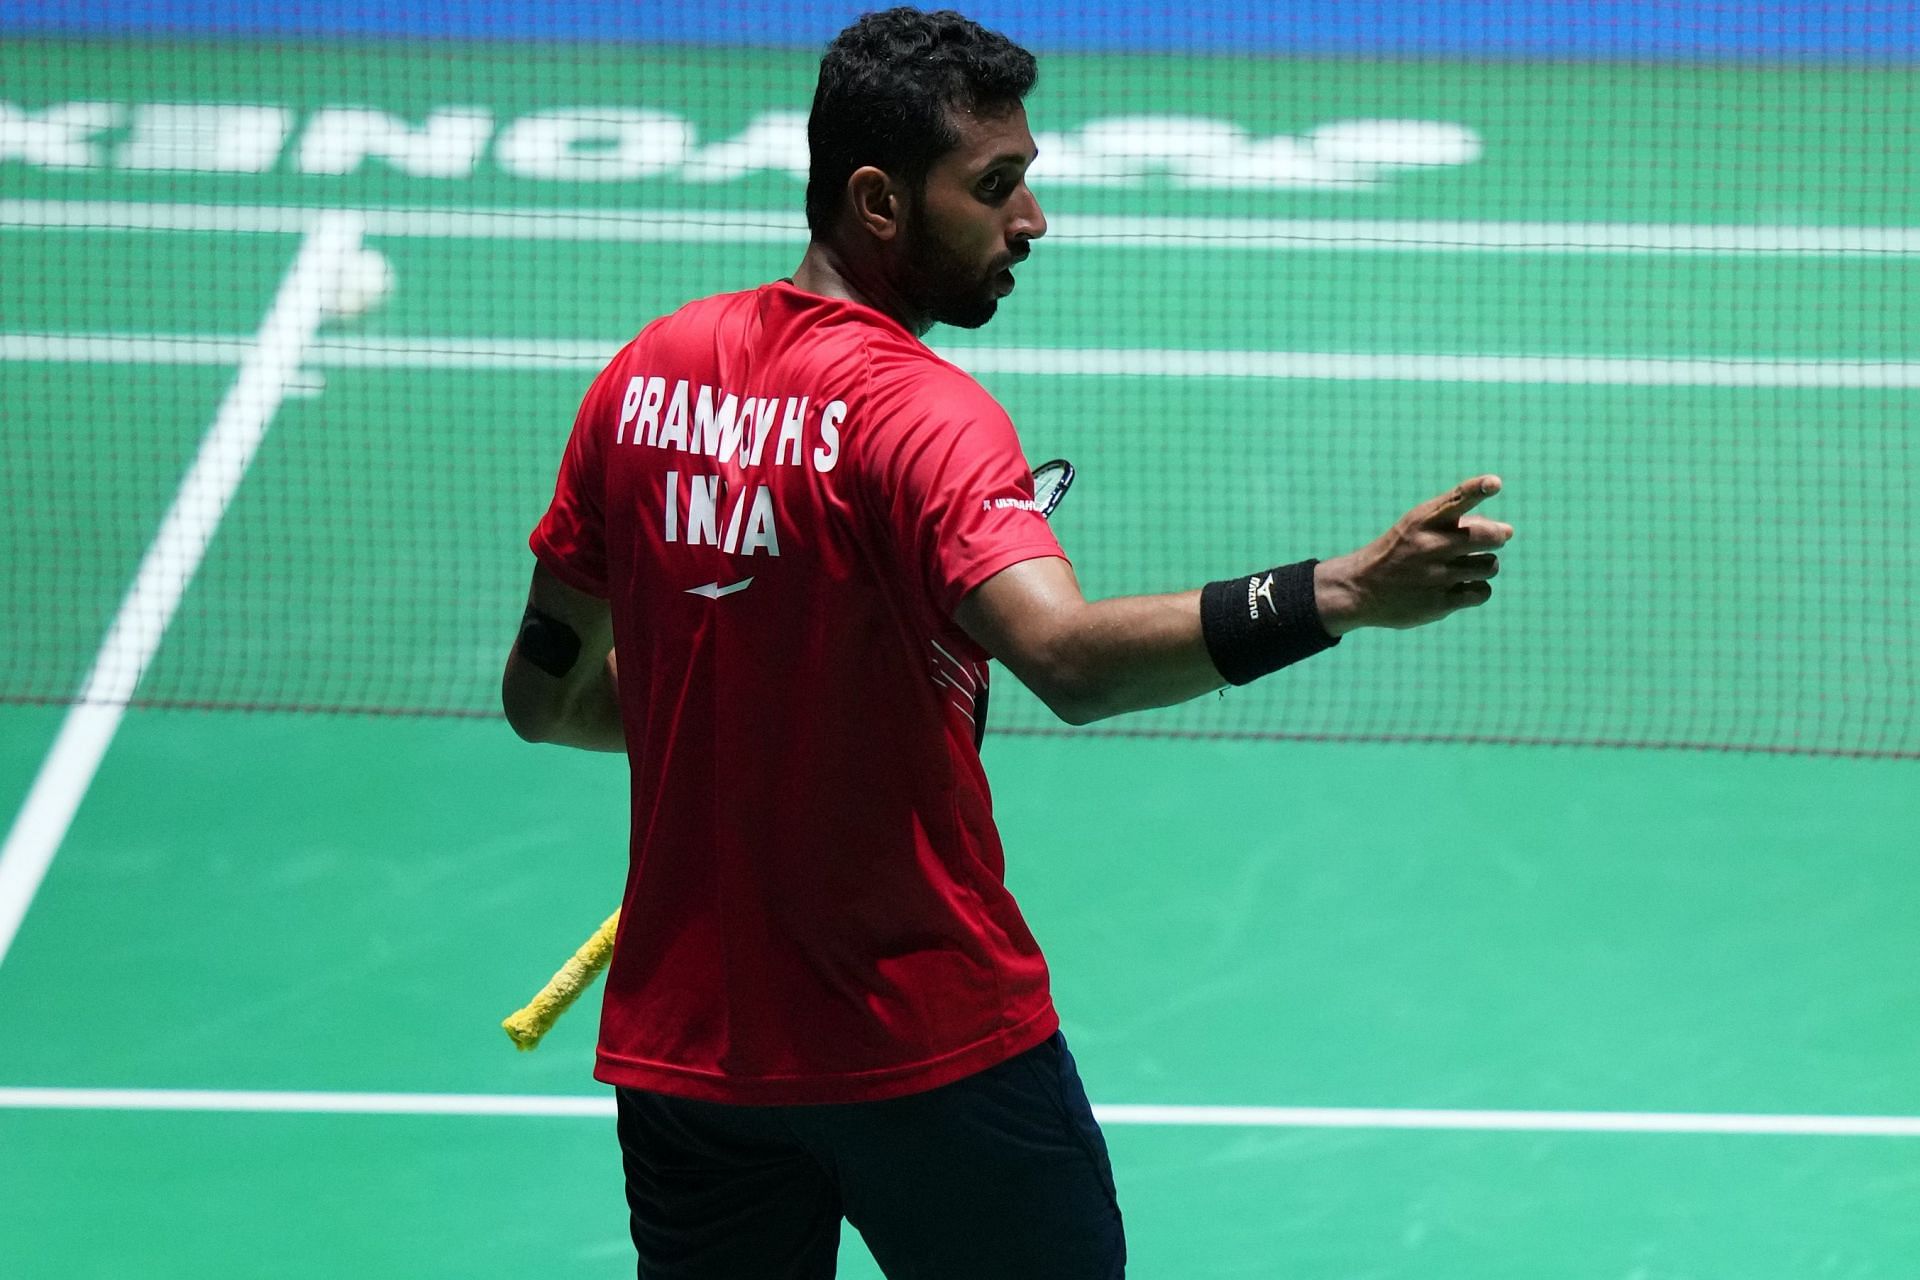 [Watch] HS Prannoy and Weng Hong Yang engage in brutal 71shot rally in